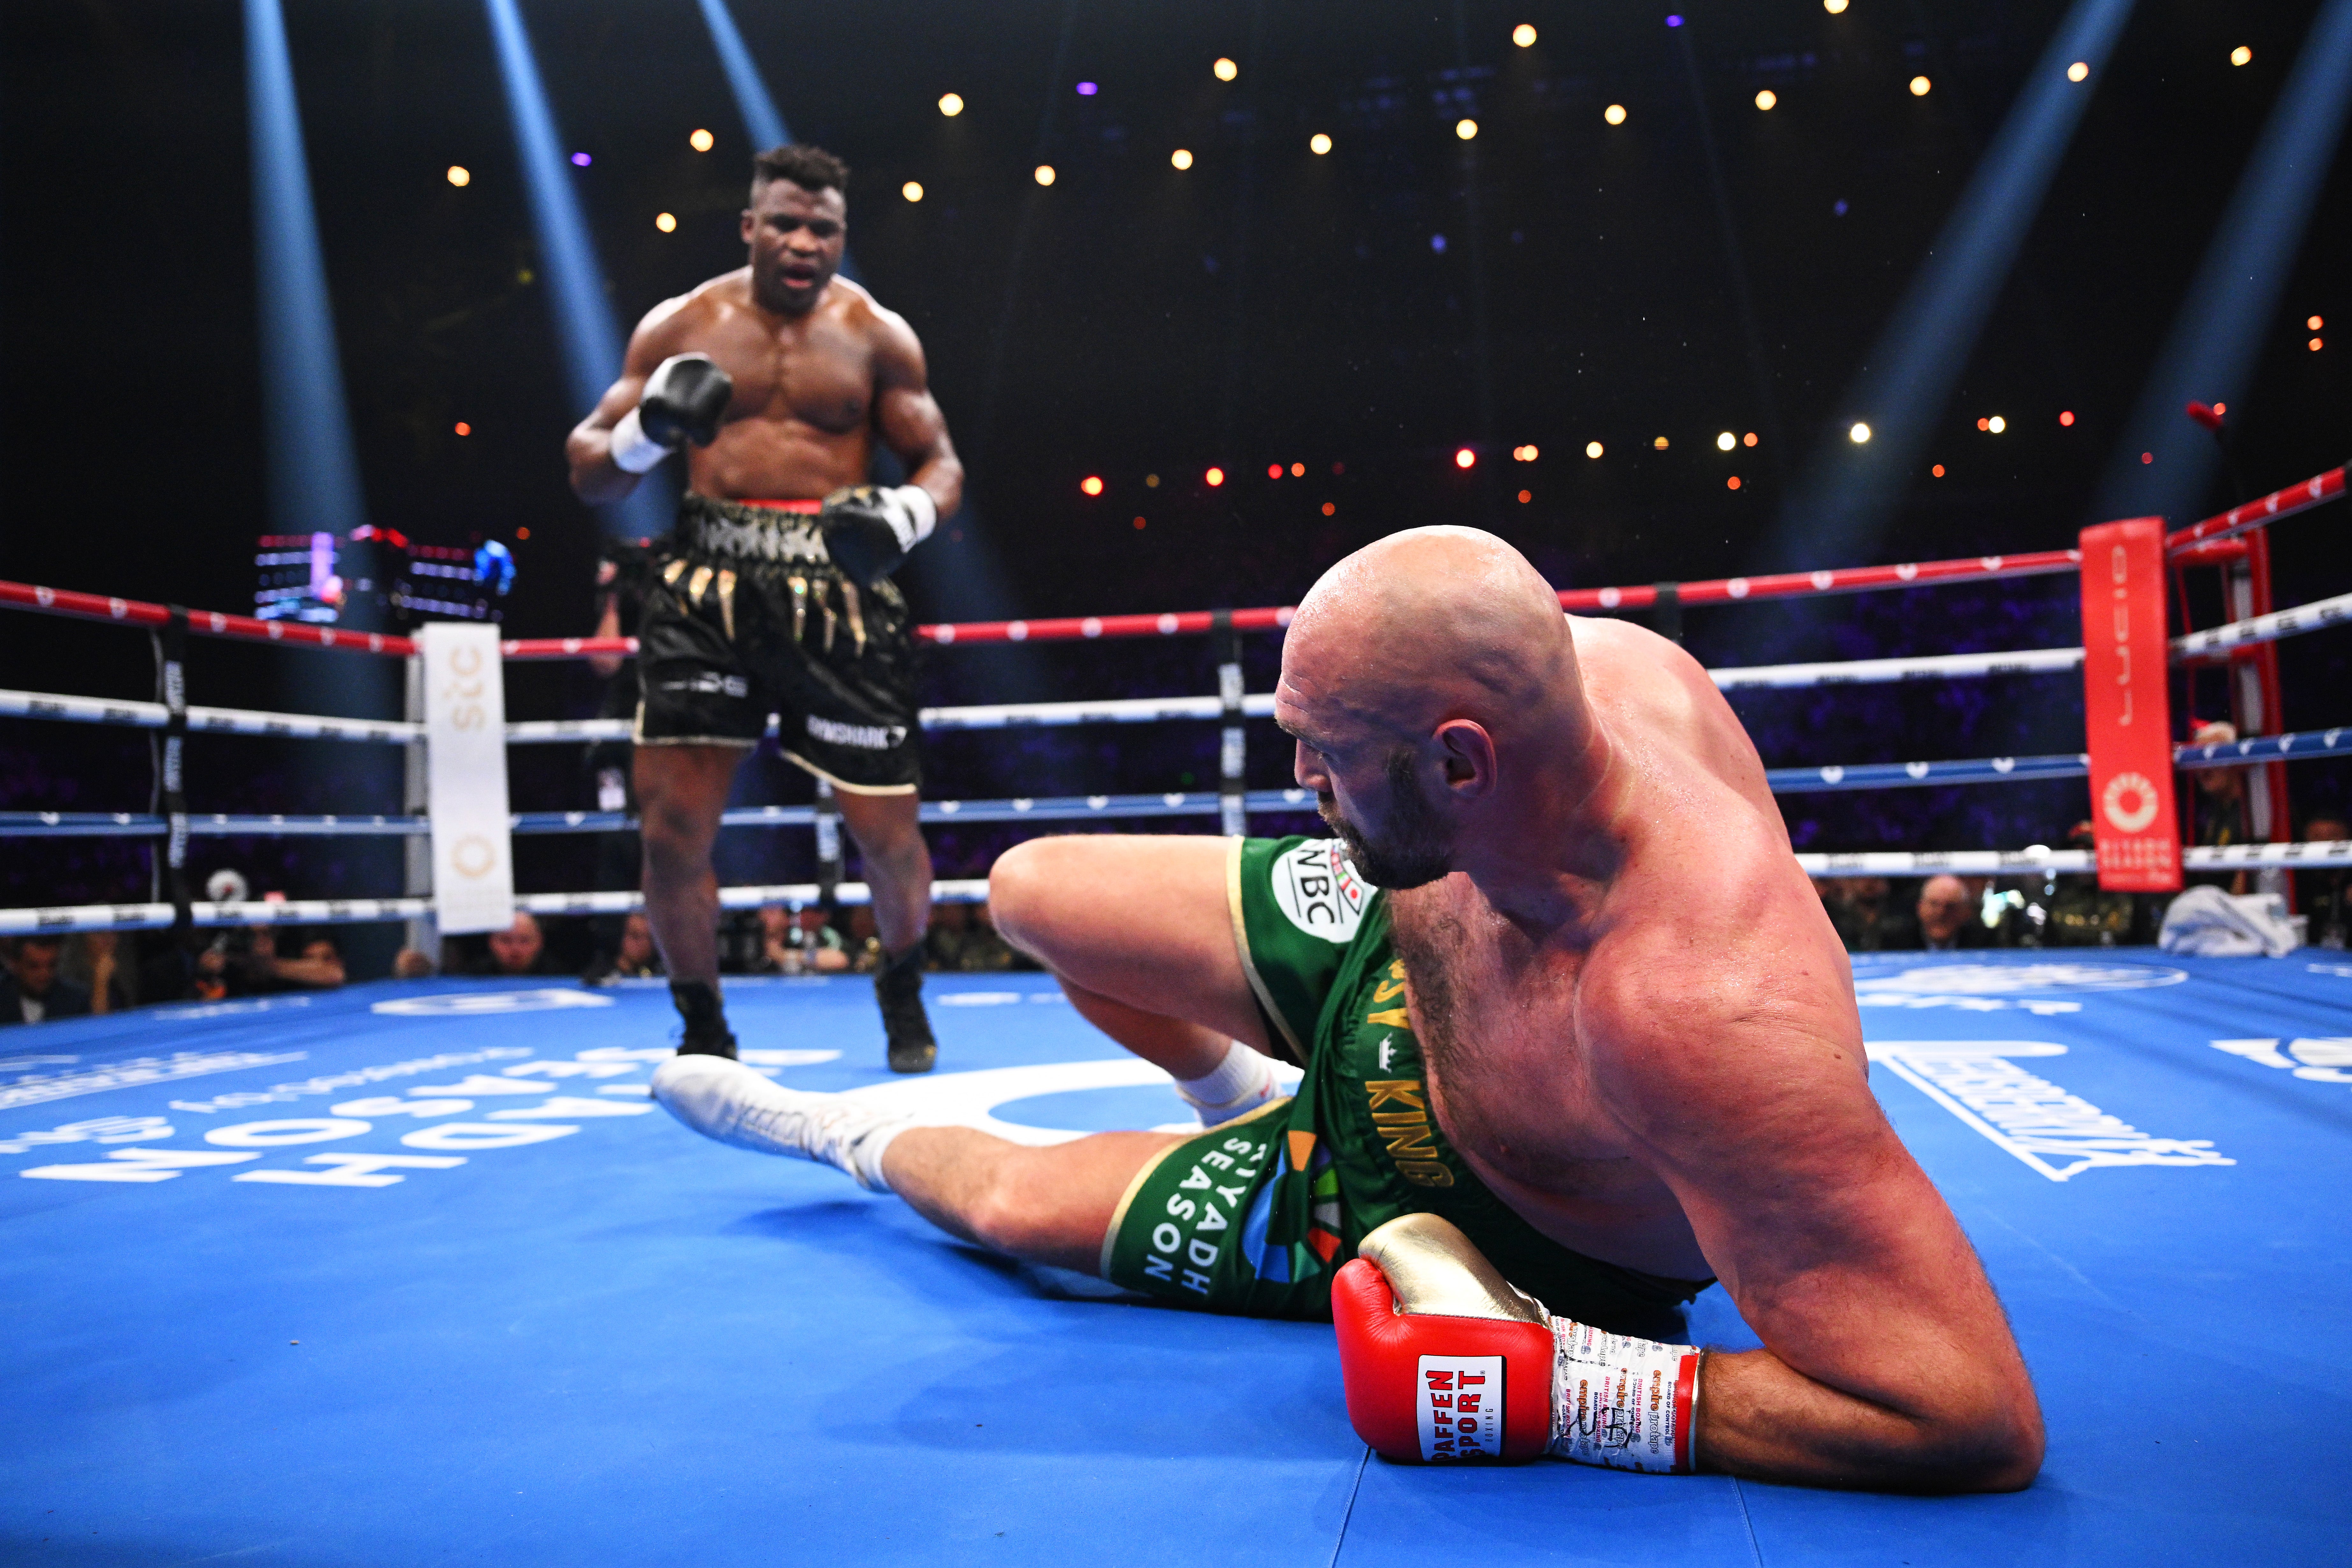 Fury was knocked to the canvas during the third round